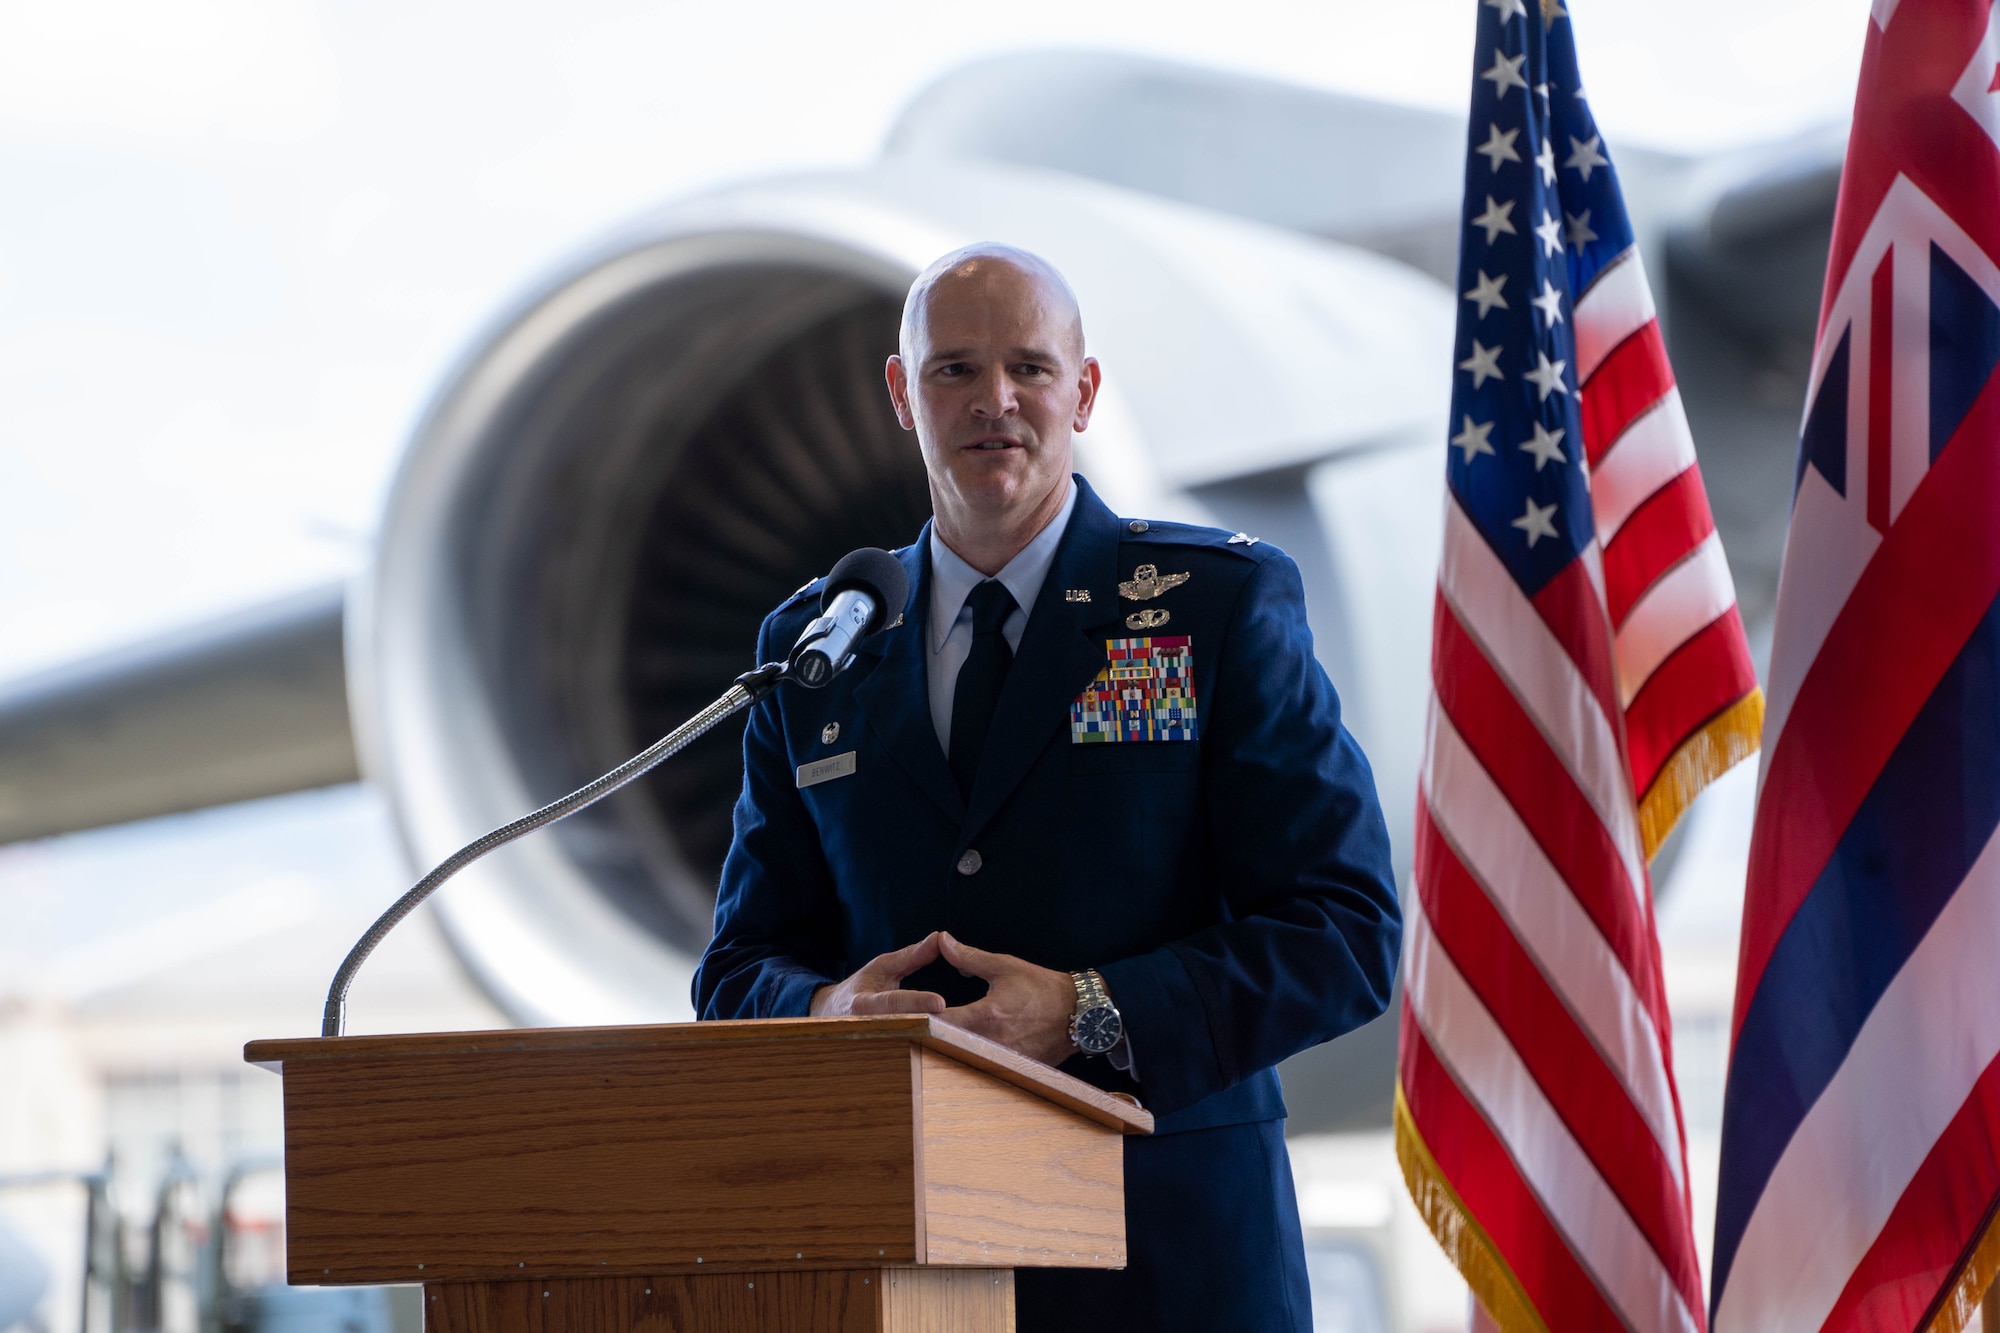 U.S. Air Force Col. Kyle A. Benwitz, 515th Air Mobility Operations Wing commander, addresses the audience during the wing's June 28, 2022 change of command ceremony.